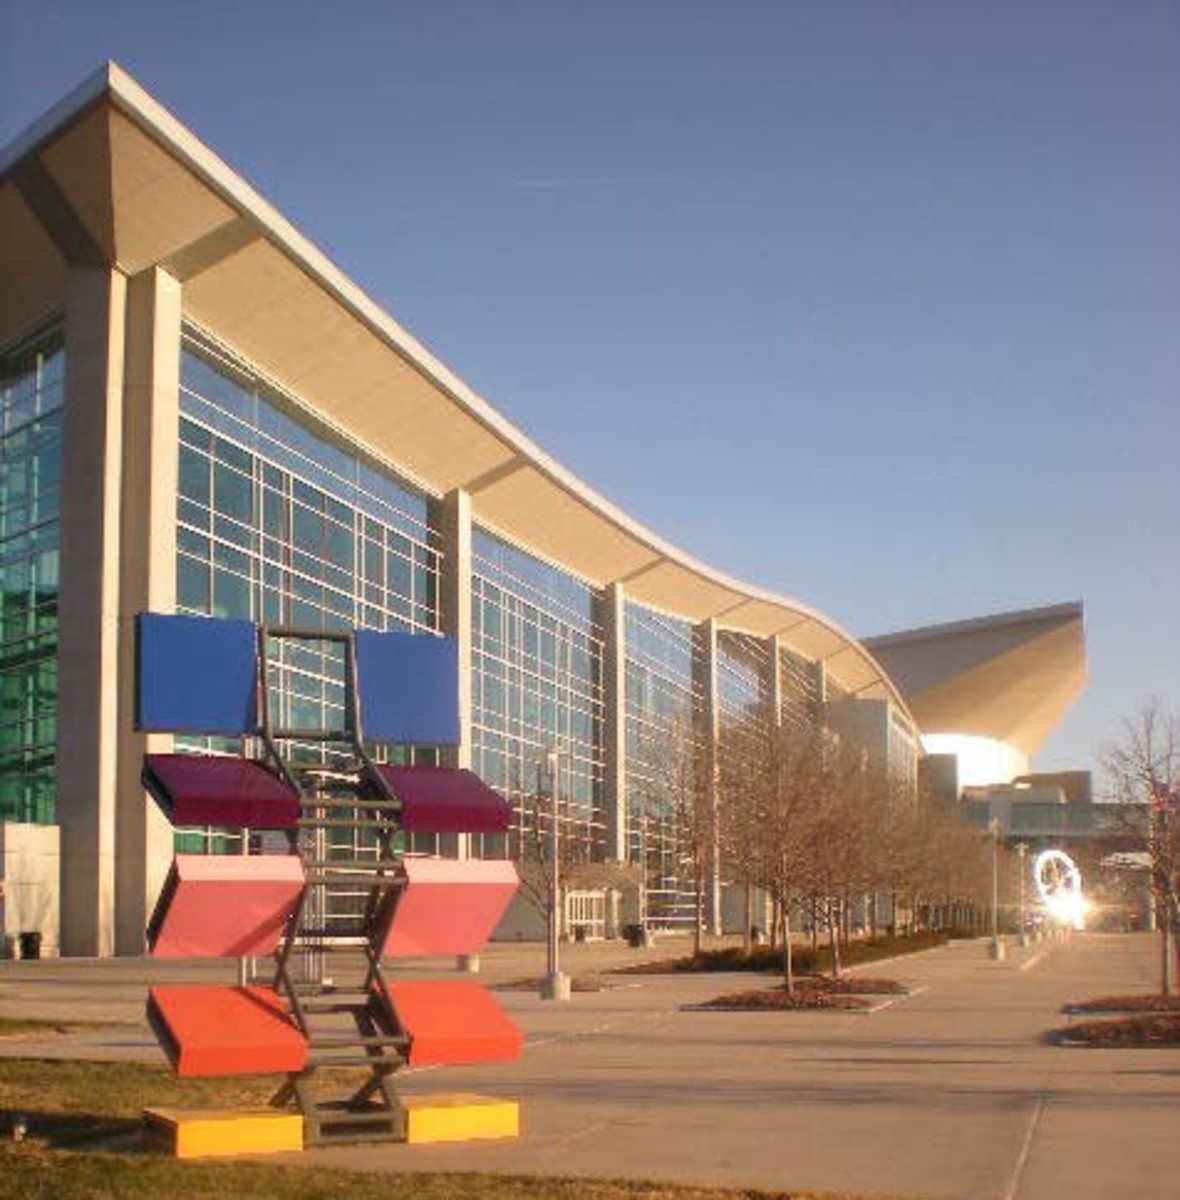 Formerly the Qwest Center in Omaha, the CHI Health Center plays host to the Nebraska state high school wrestling championships.